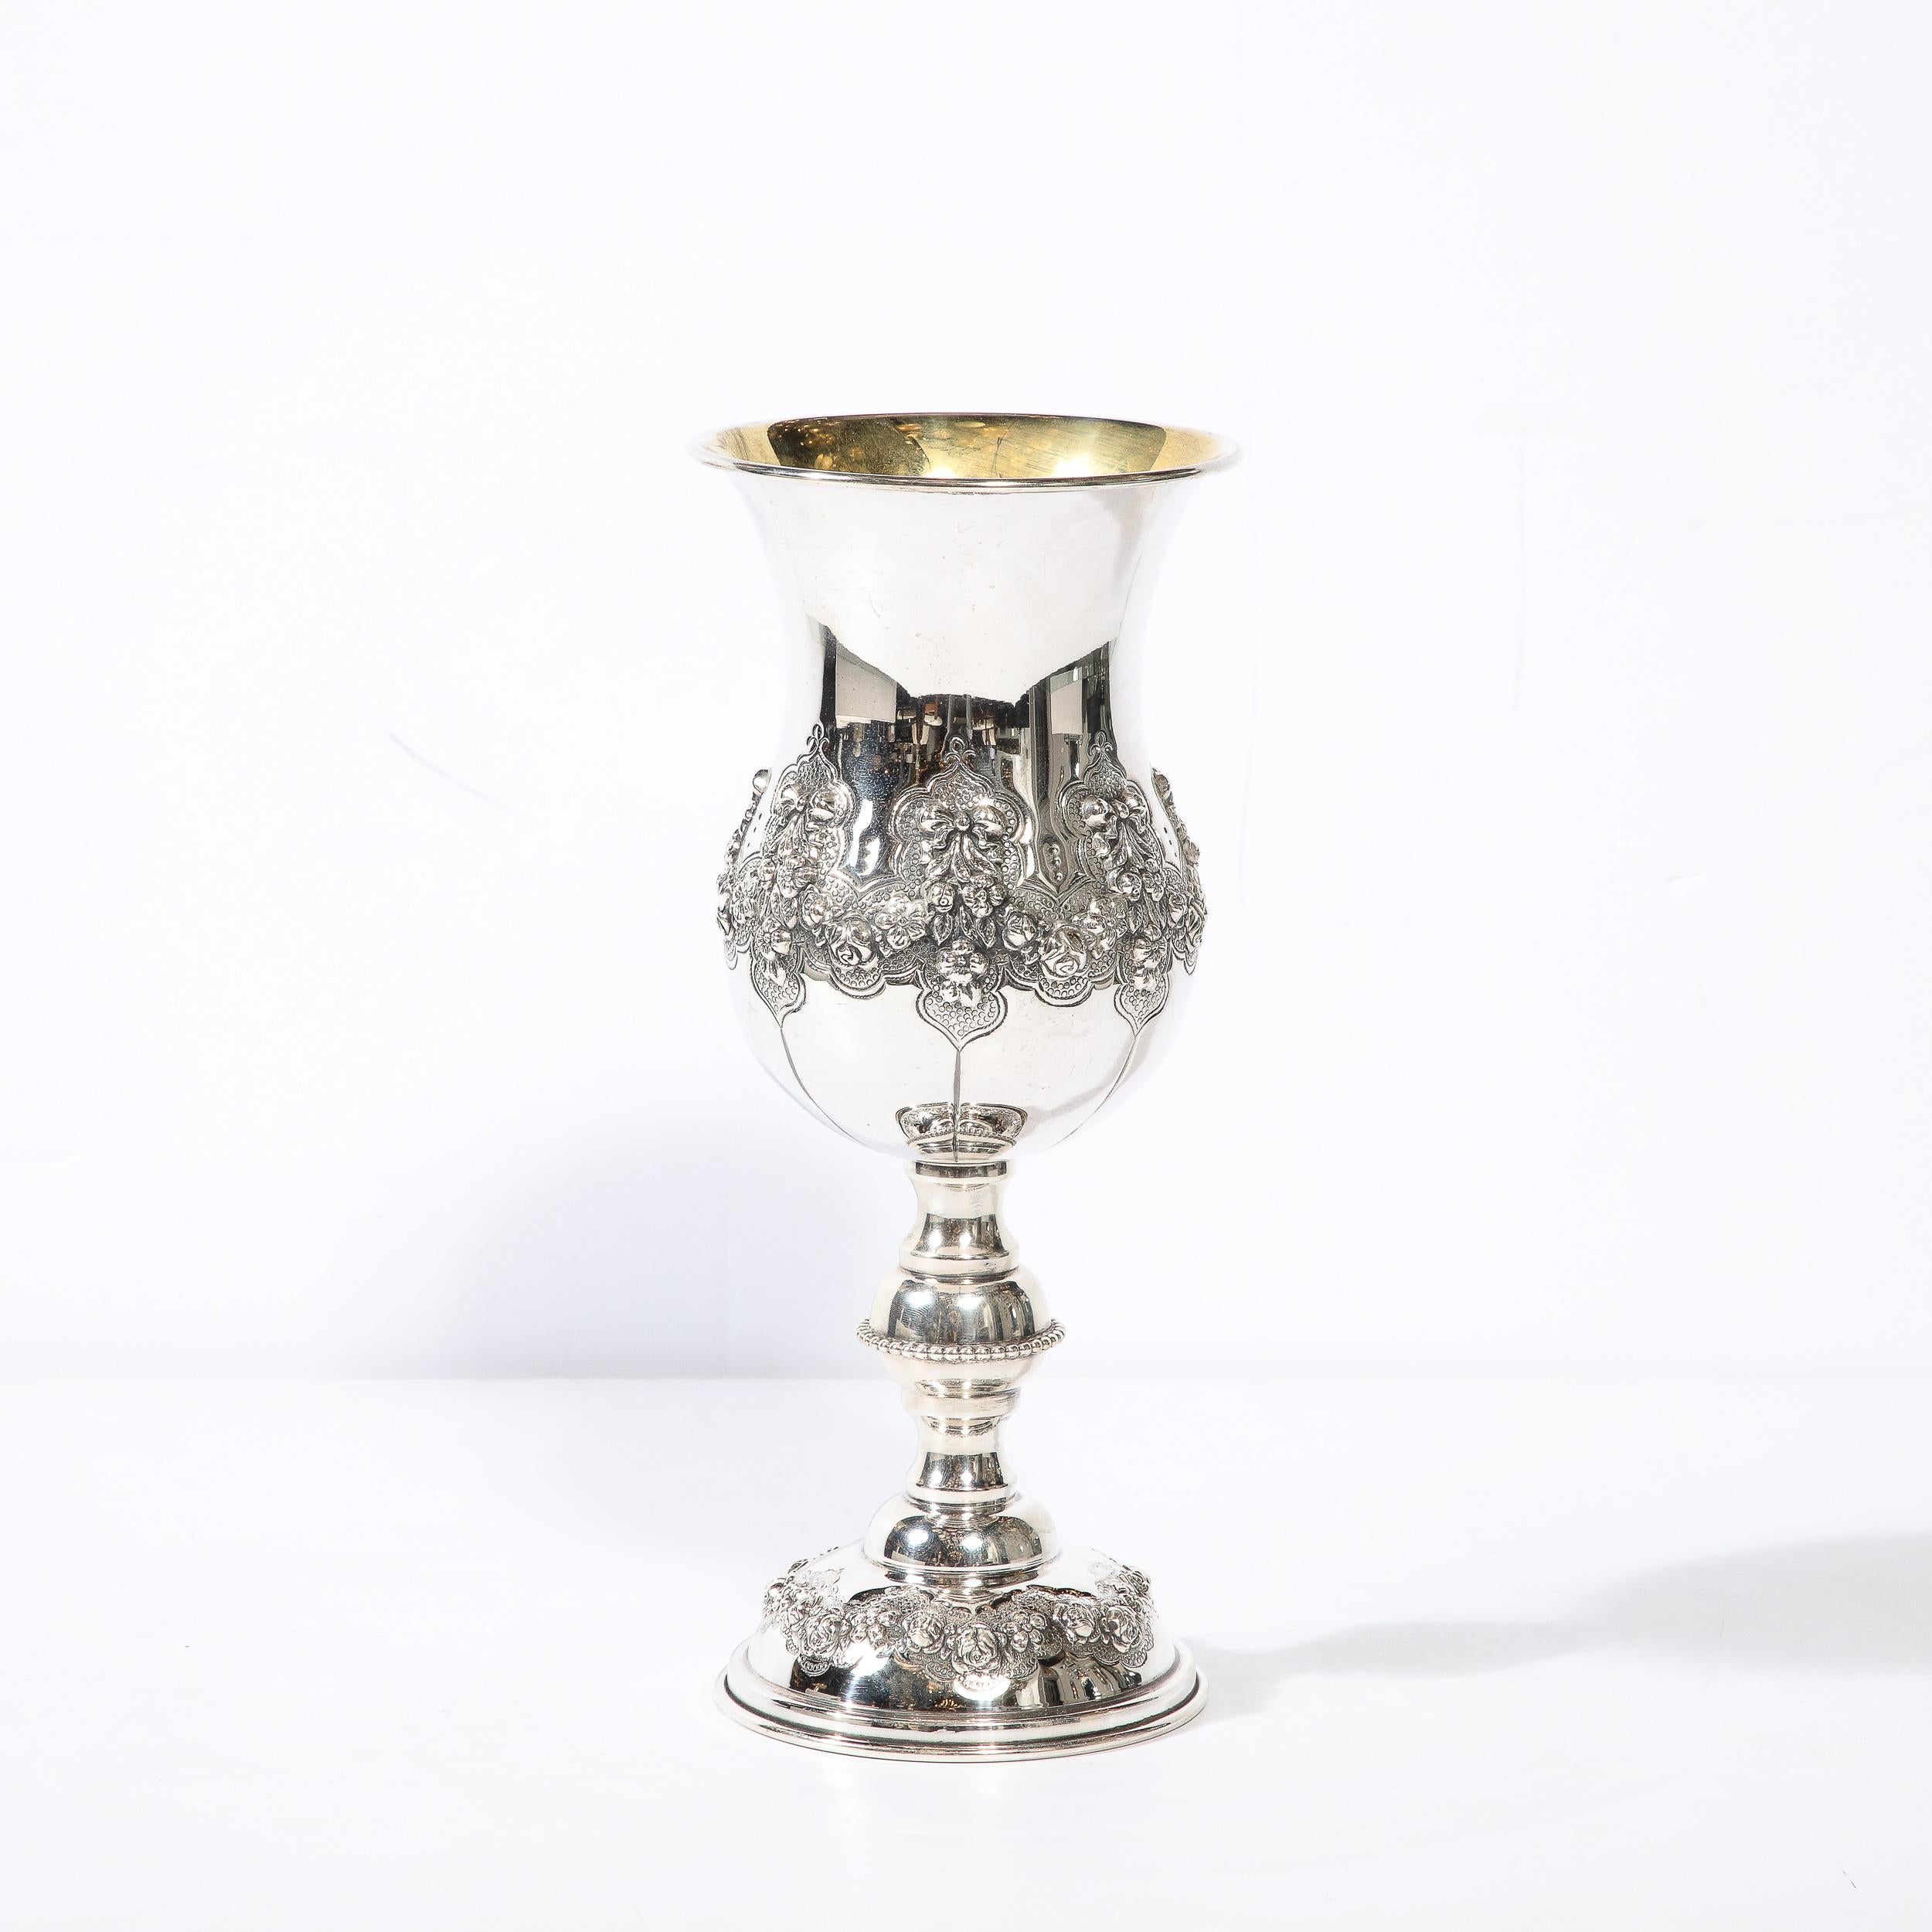 This gorgeous large Sterling Silver Kiddish goblet with beautiful floral swag design is executed in the reposse style. Hadad Brothers, an esteemed silver and Judaica company in Israel during the 20th Century. A beautiful and substantial piece, this